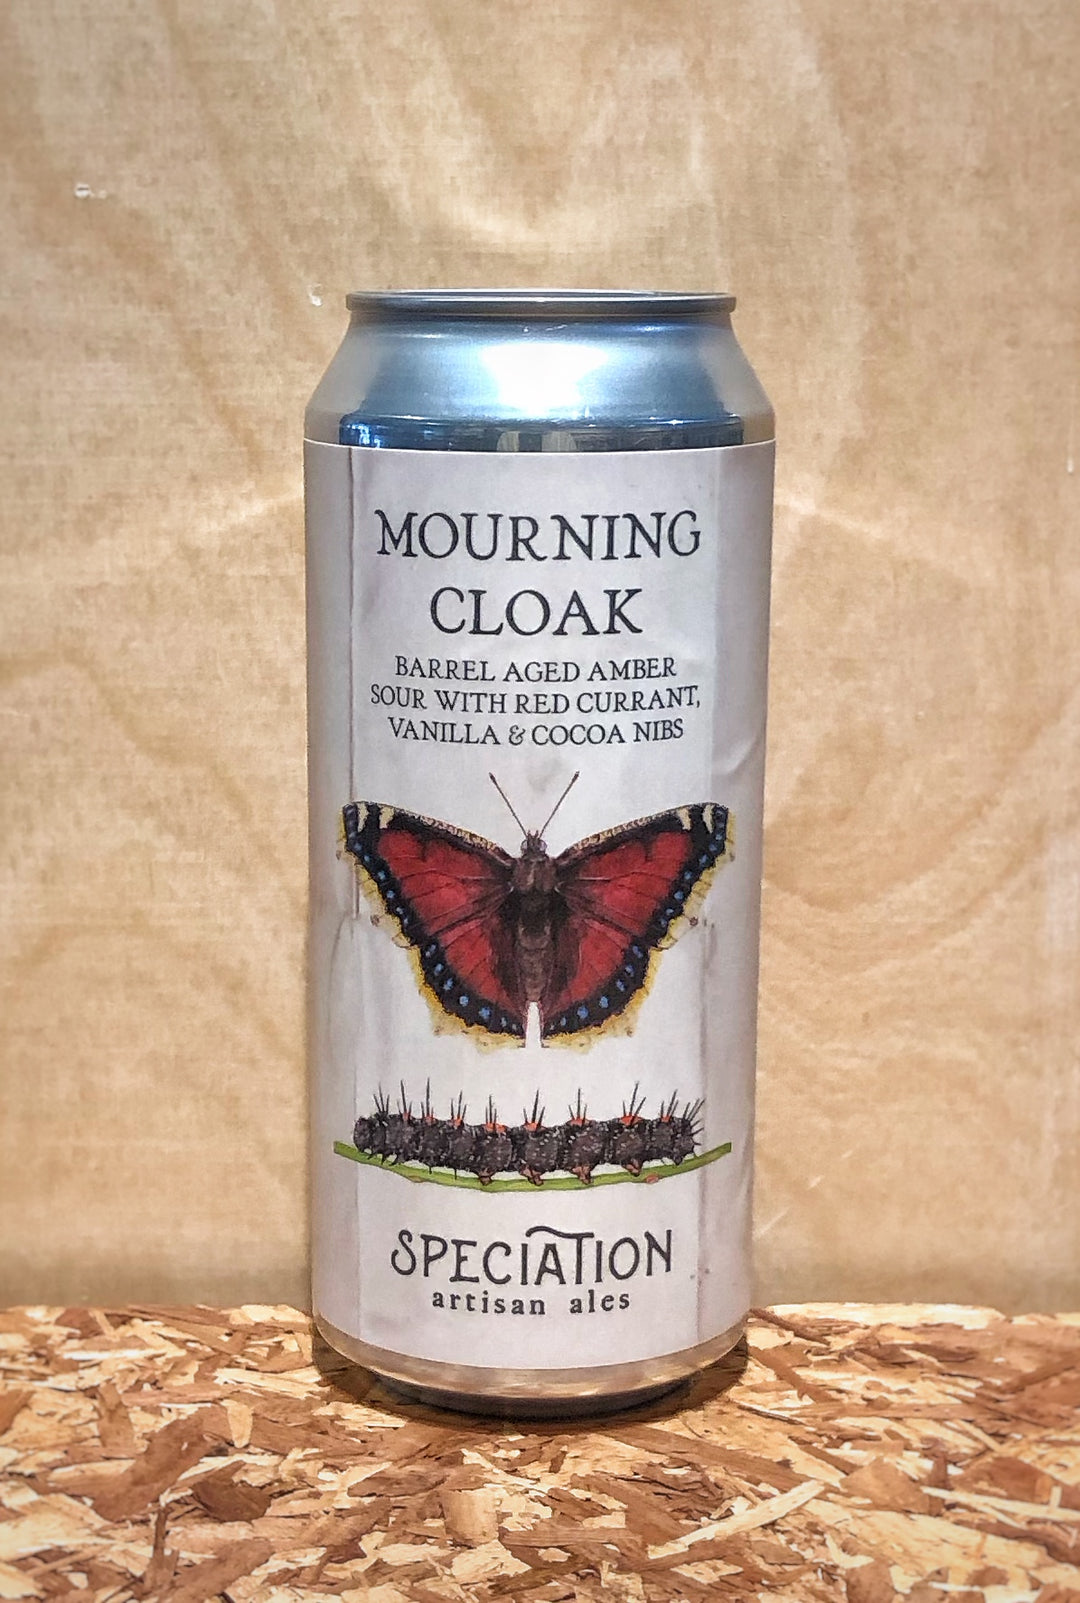 Speciation Artisan Ales 'Mourning Cloak' Barrel Aged Amber Sour with Red Currant, Vanilla, & Cocoa Nibs (Grand Rapids, MI)